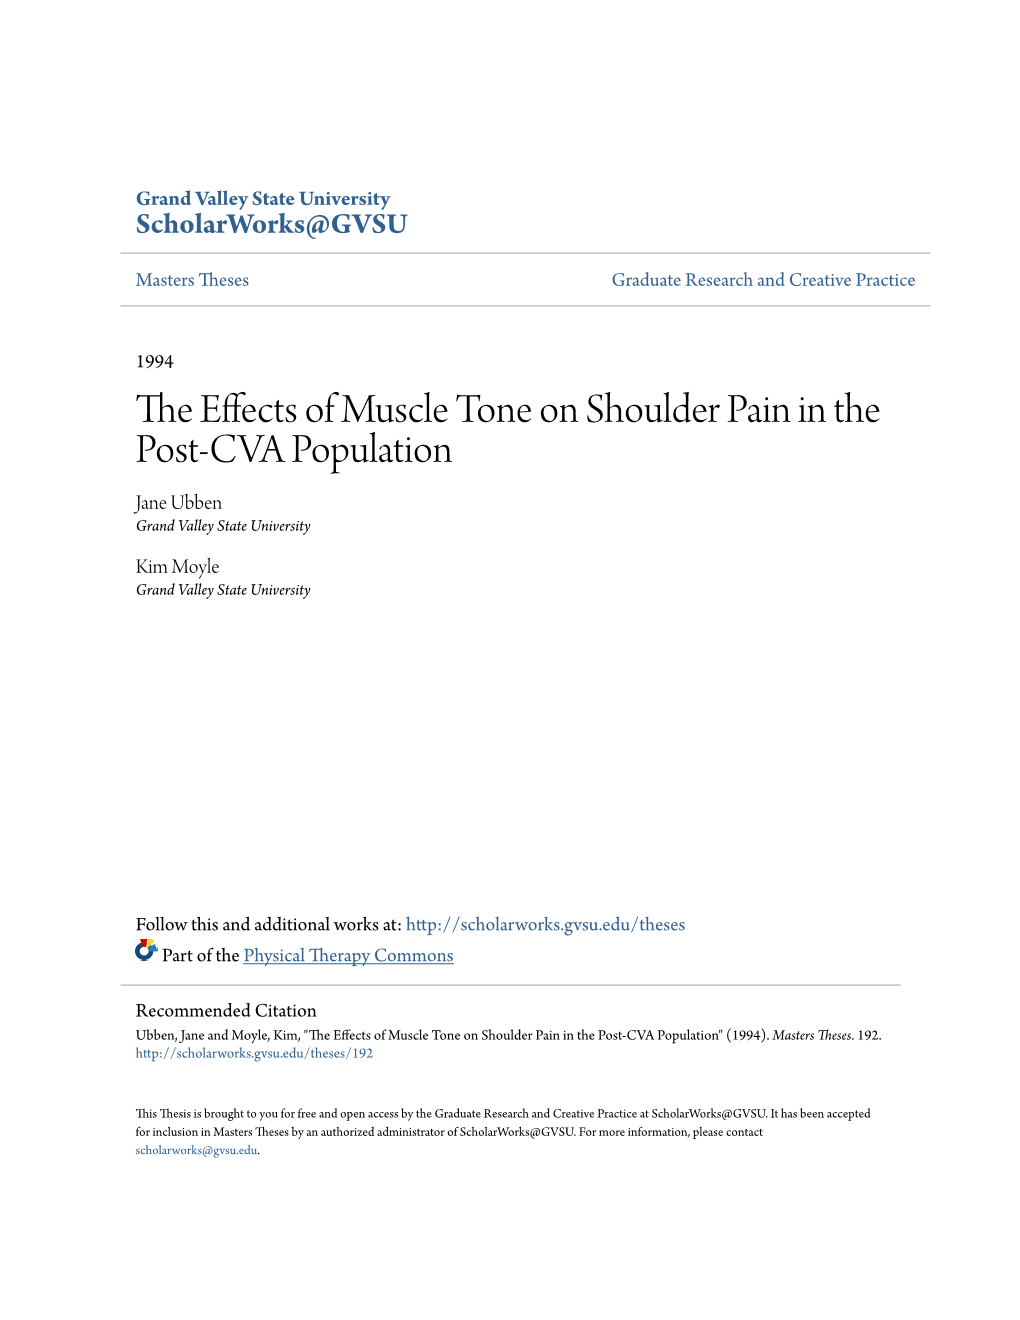 The Effects of Muscle Tone on Shoulder Pain in the Post-CVA Population" (1994)